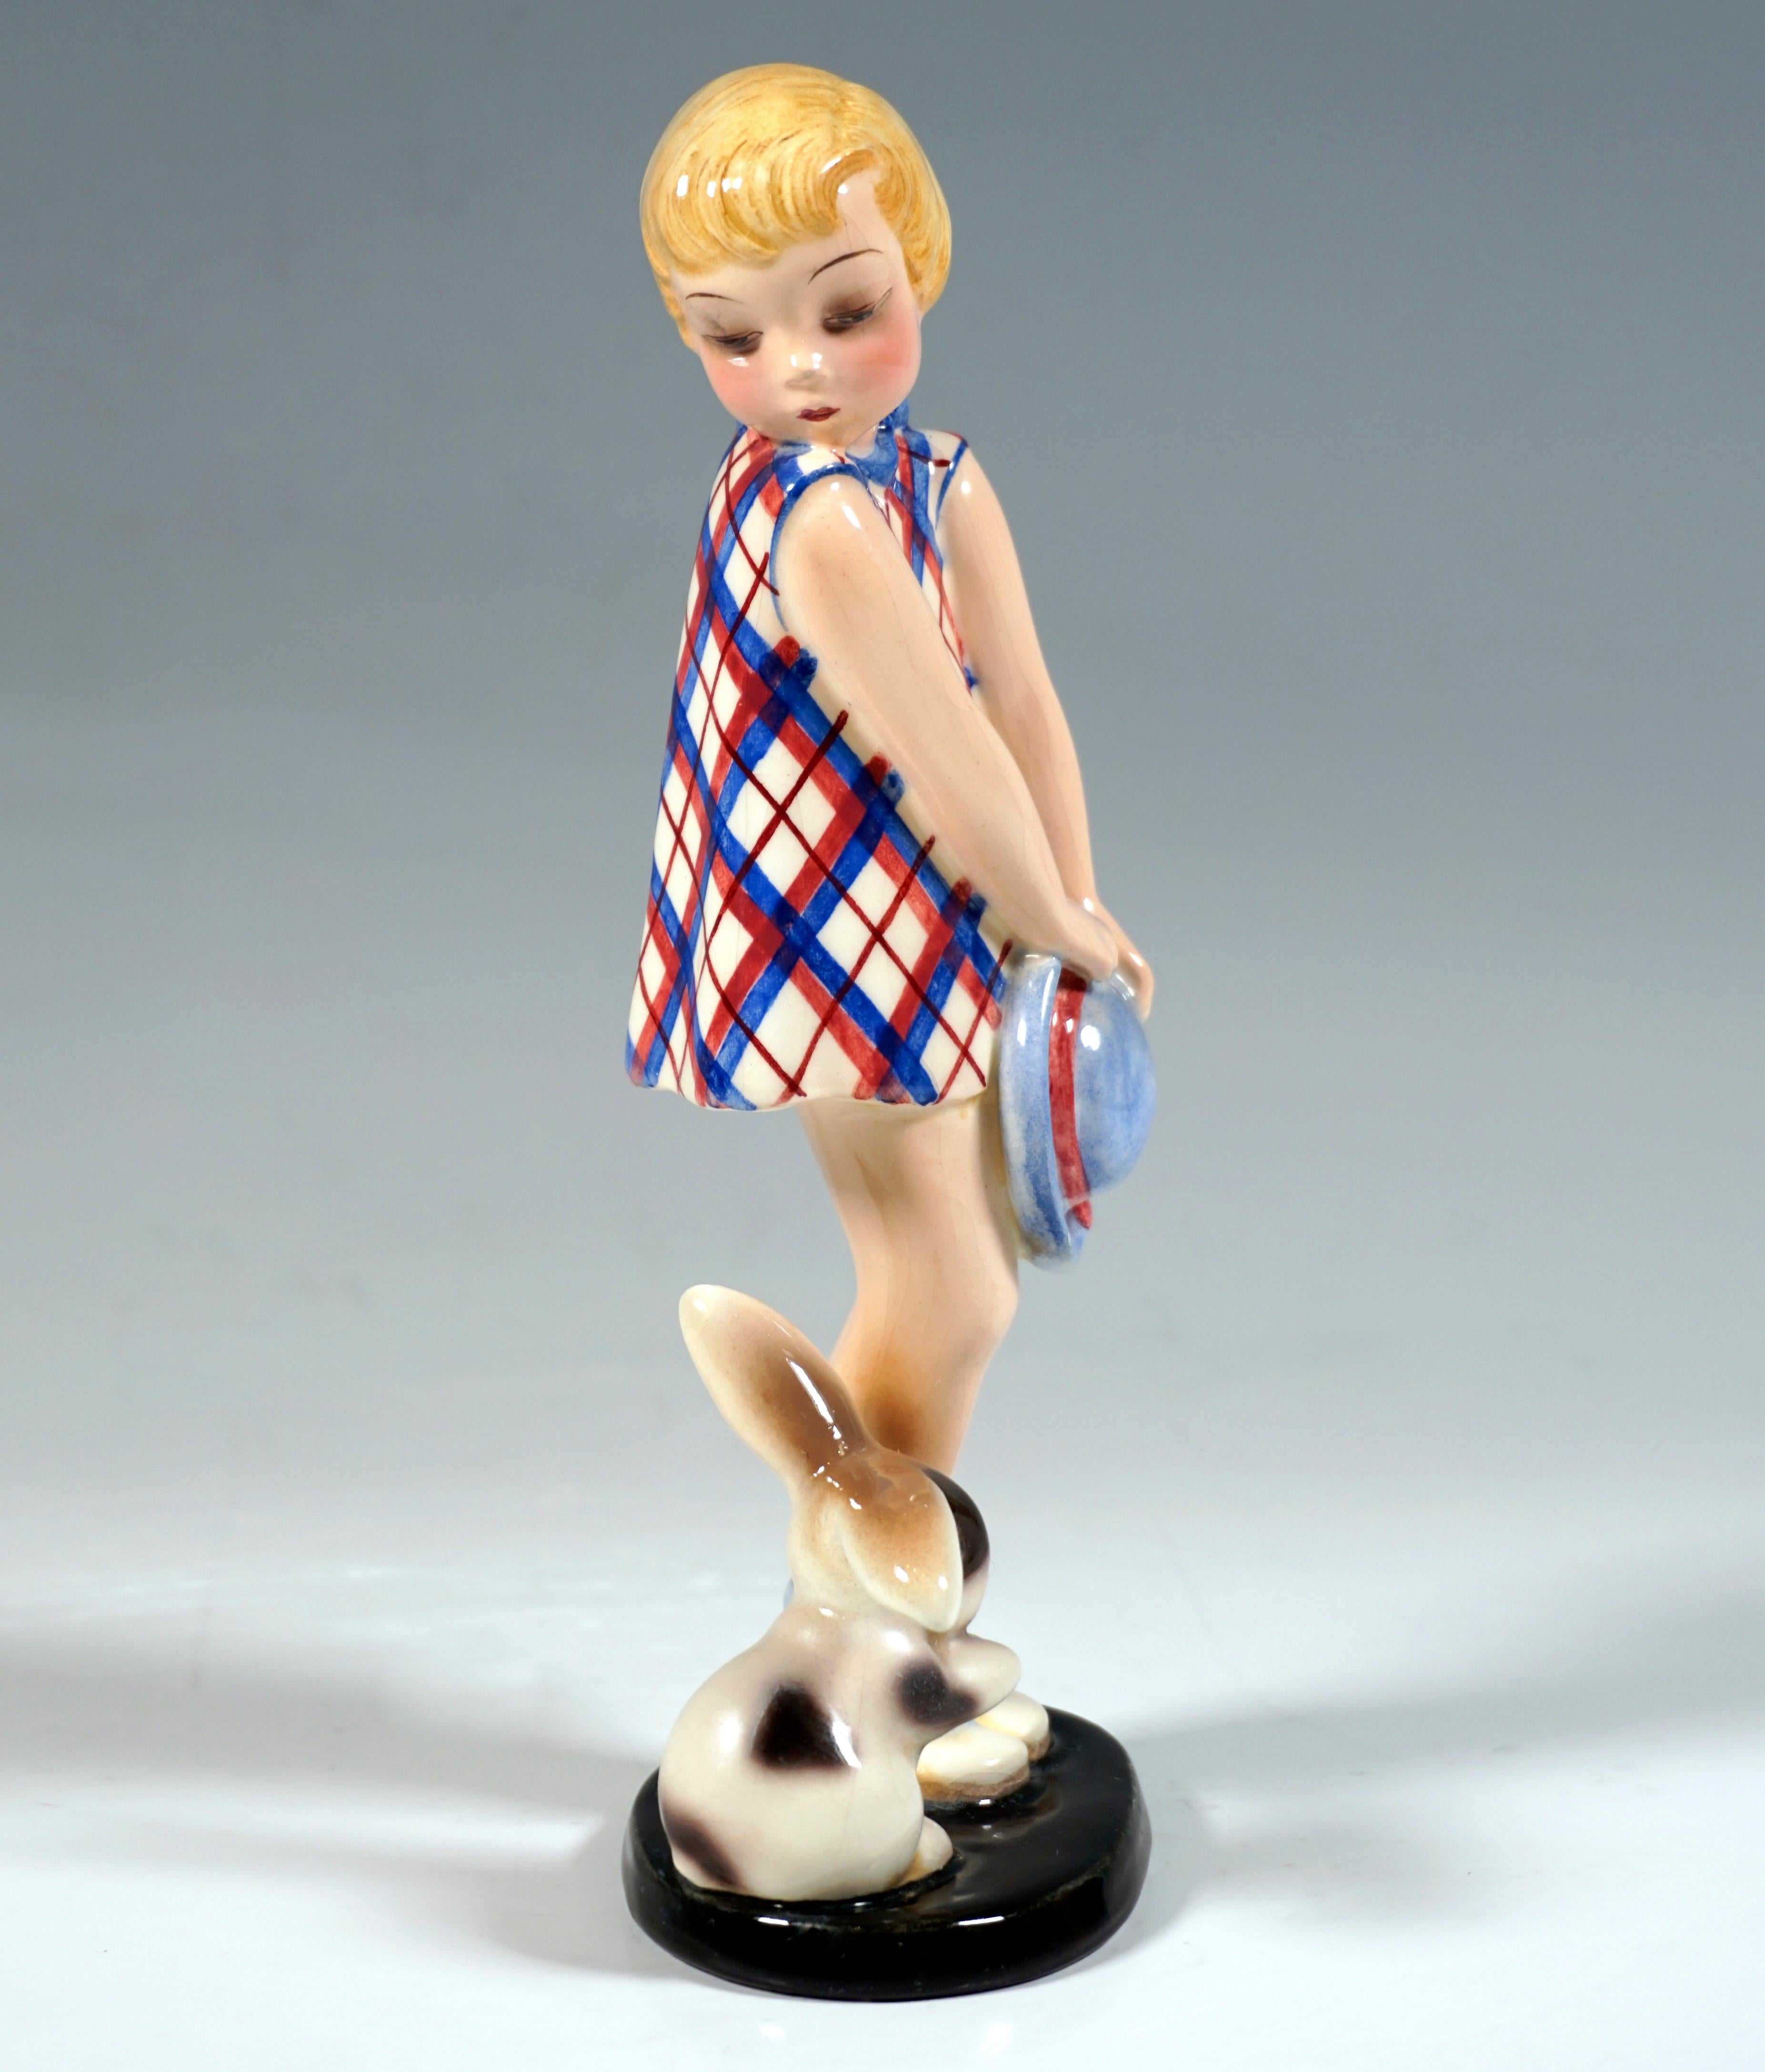 Little blond girl in red and blue plaid dress, holding a light blue hat in both hands in front of her, looking over her right shoulder down at a small rabbit beside her.
On a black, oval flat base.

Designer:
Claire/Klára Herczeg/Weiss (1906 -